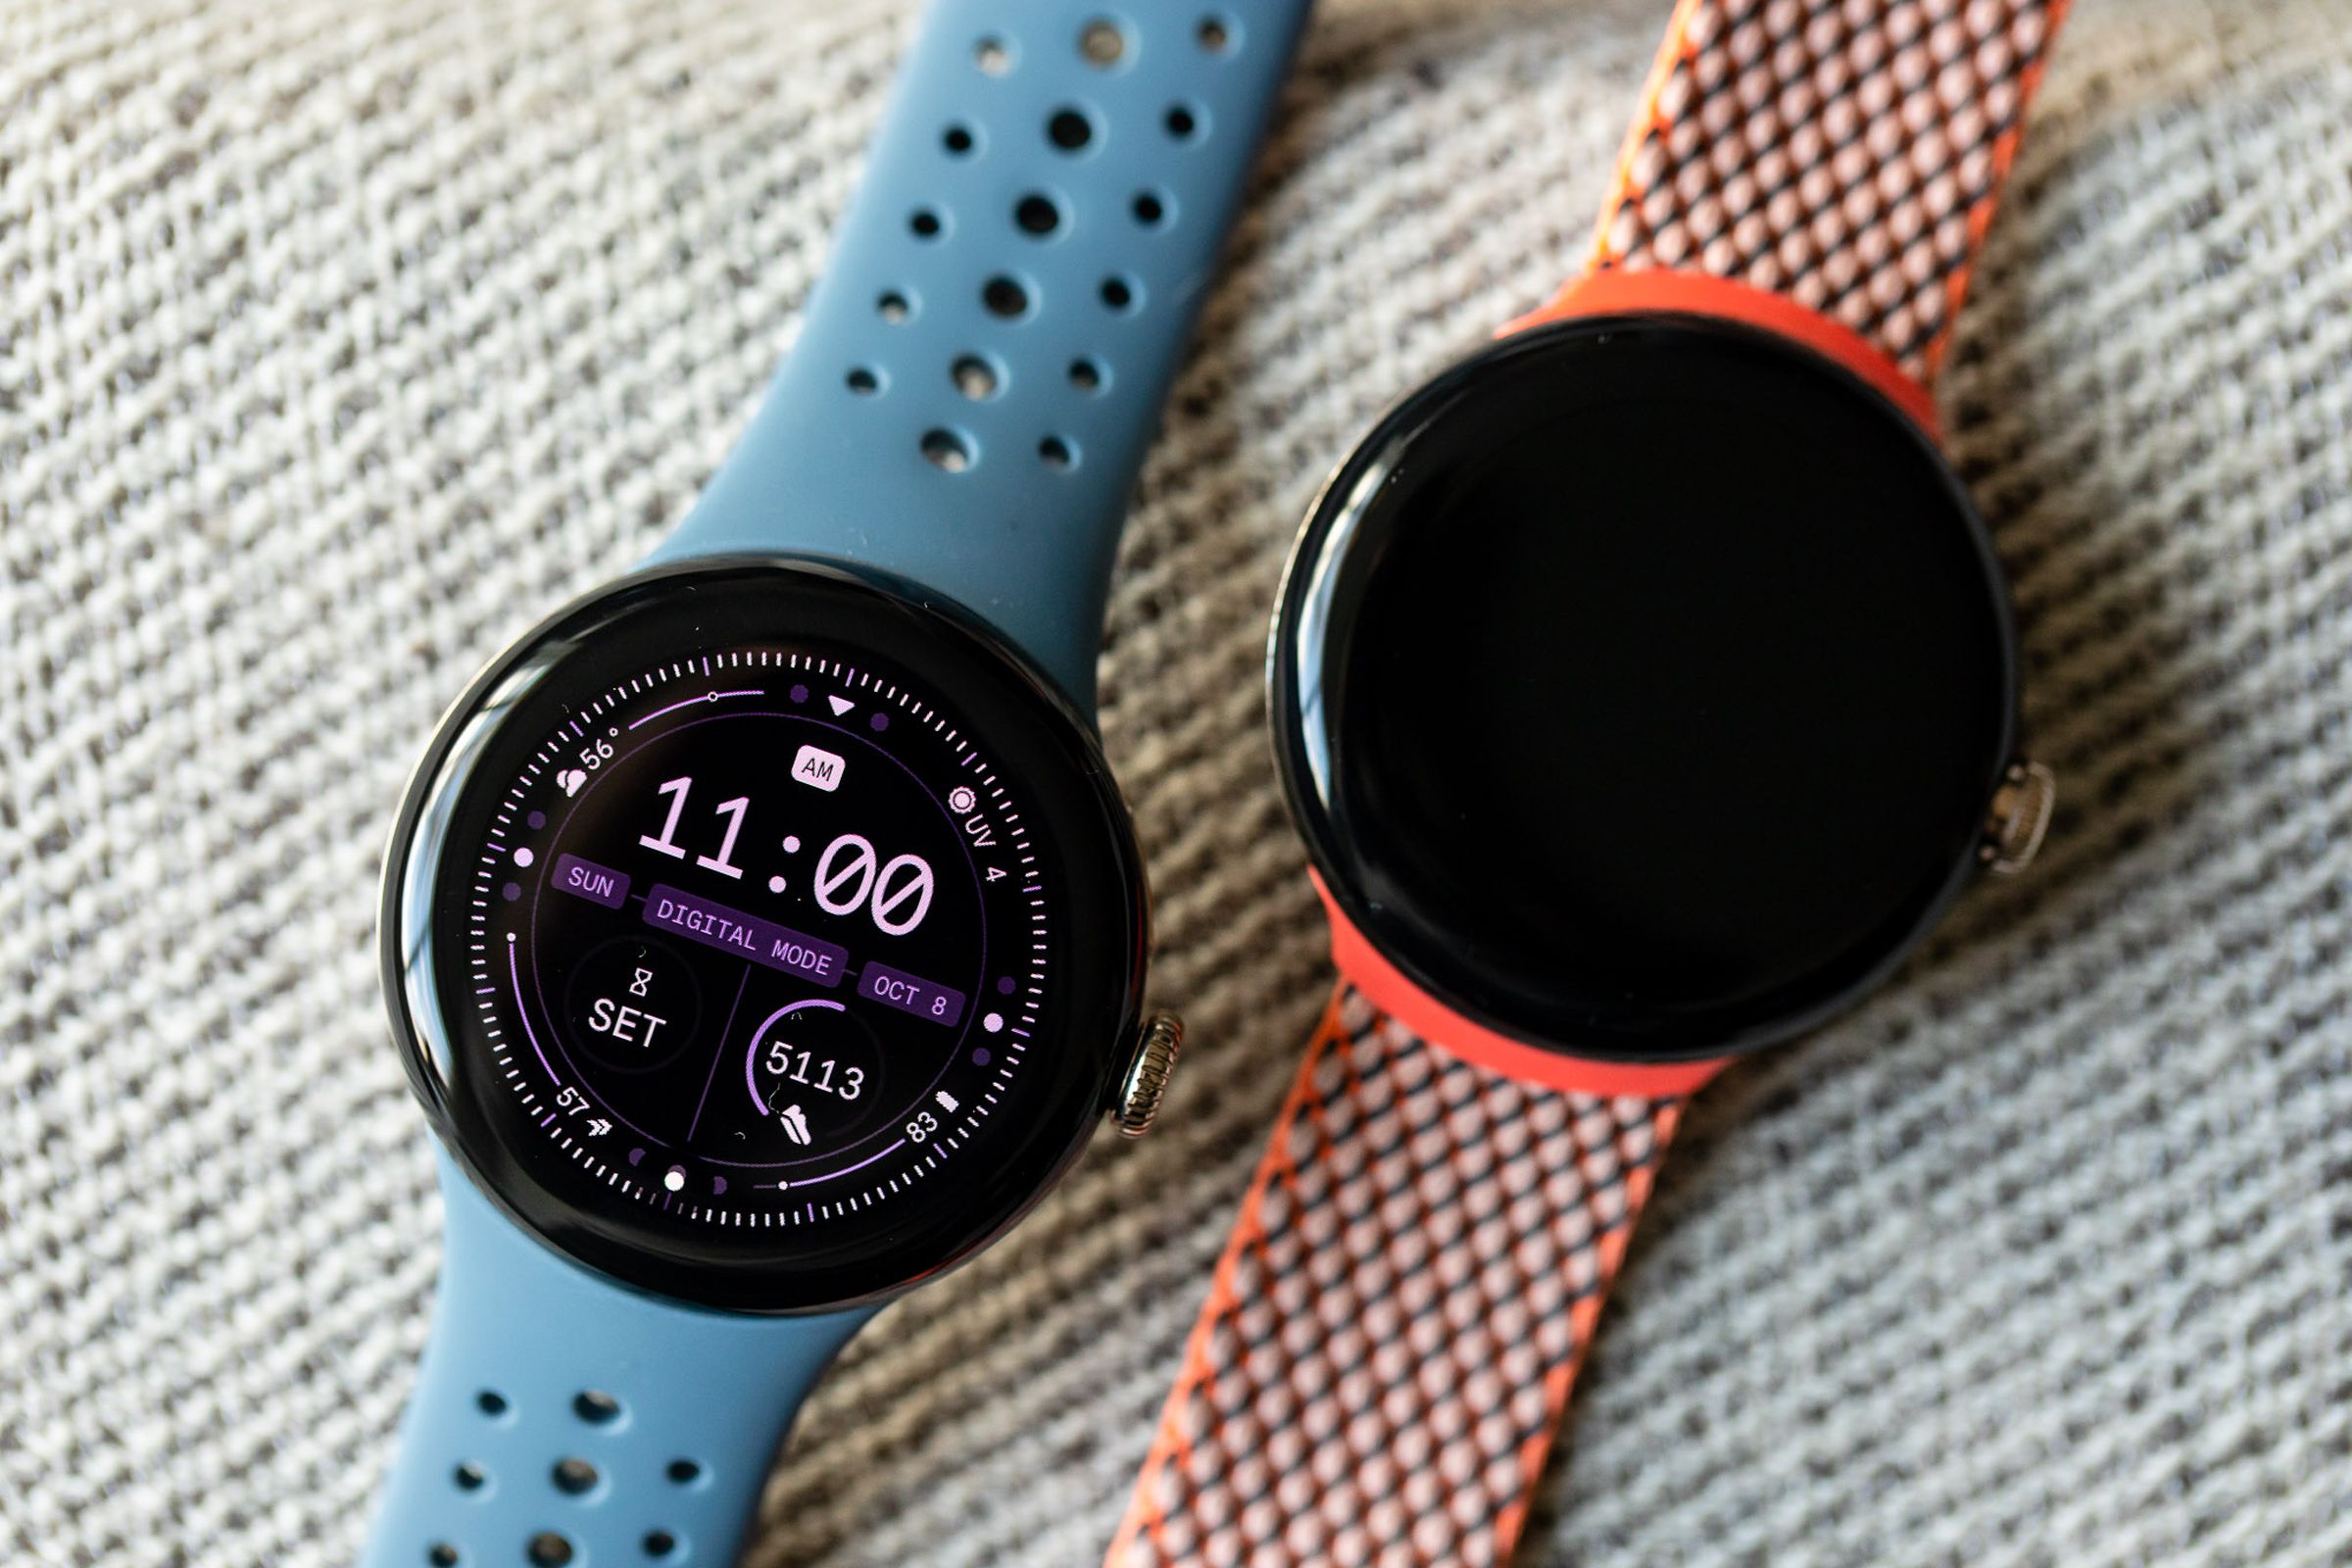 The Pixel Watch 2 with its screen on, next to the original Pixel Watch with its screen off.